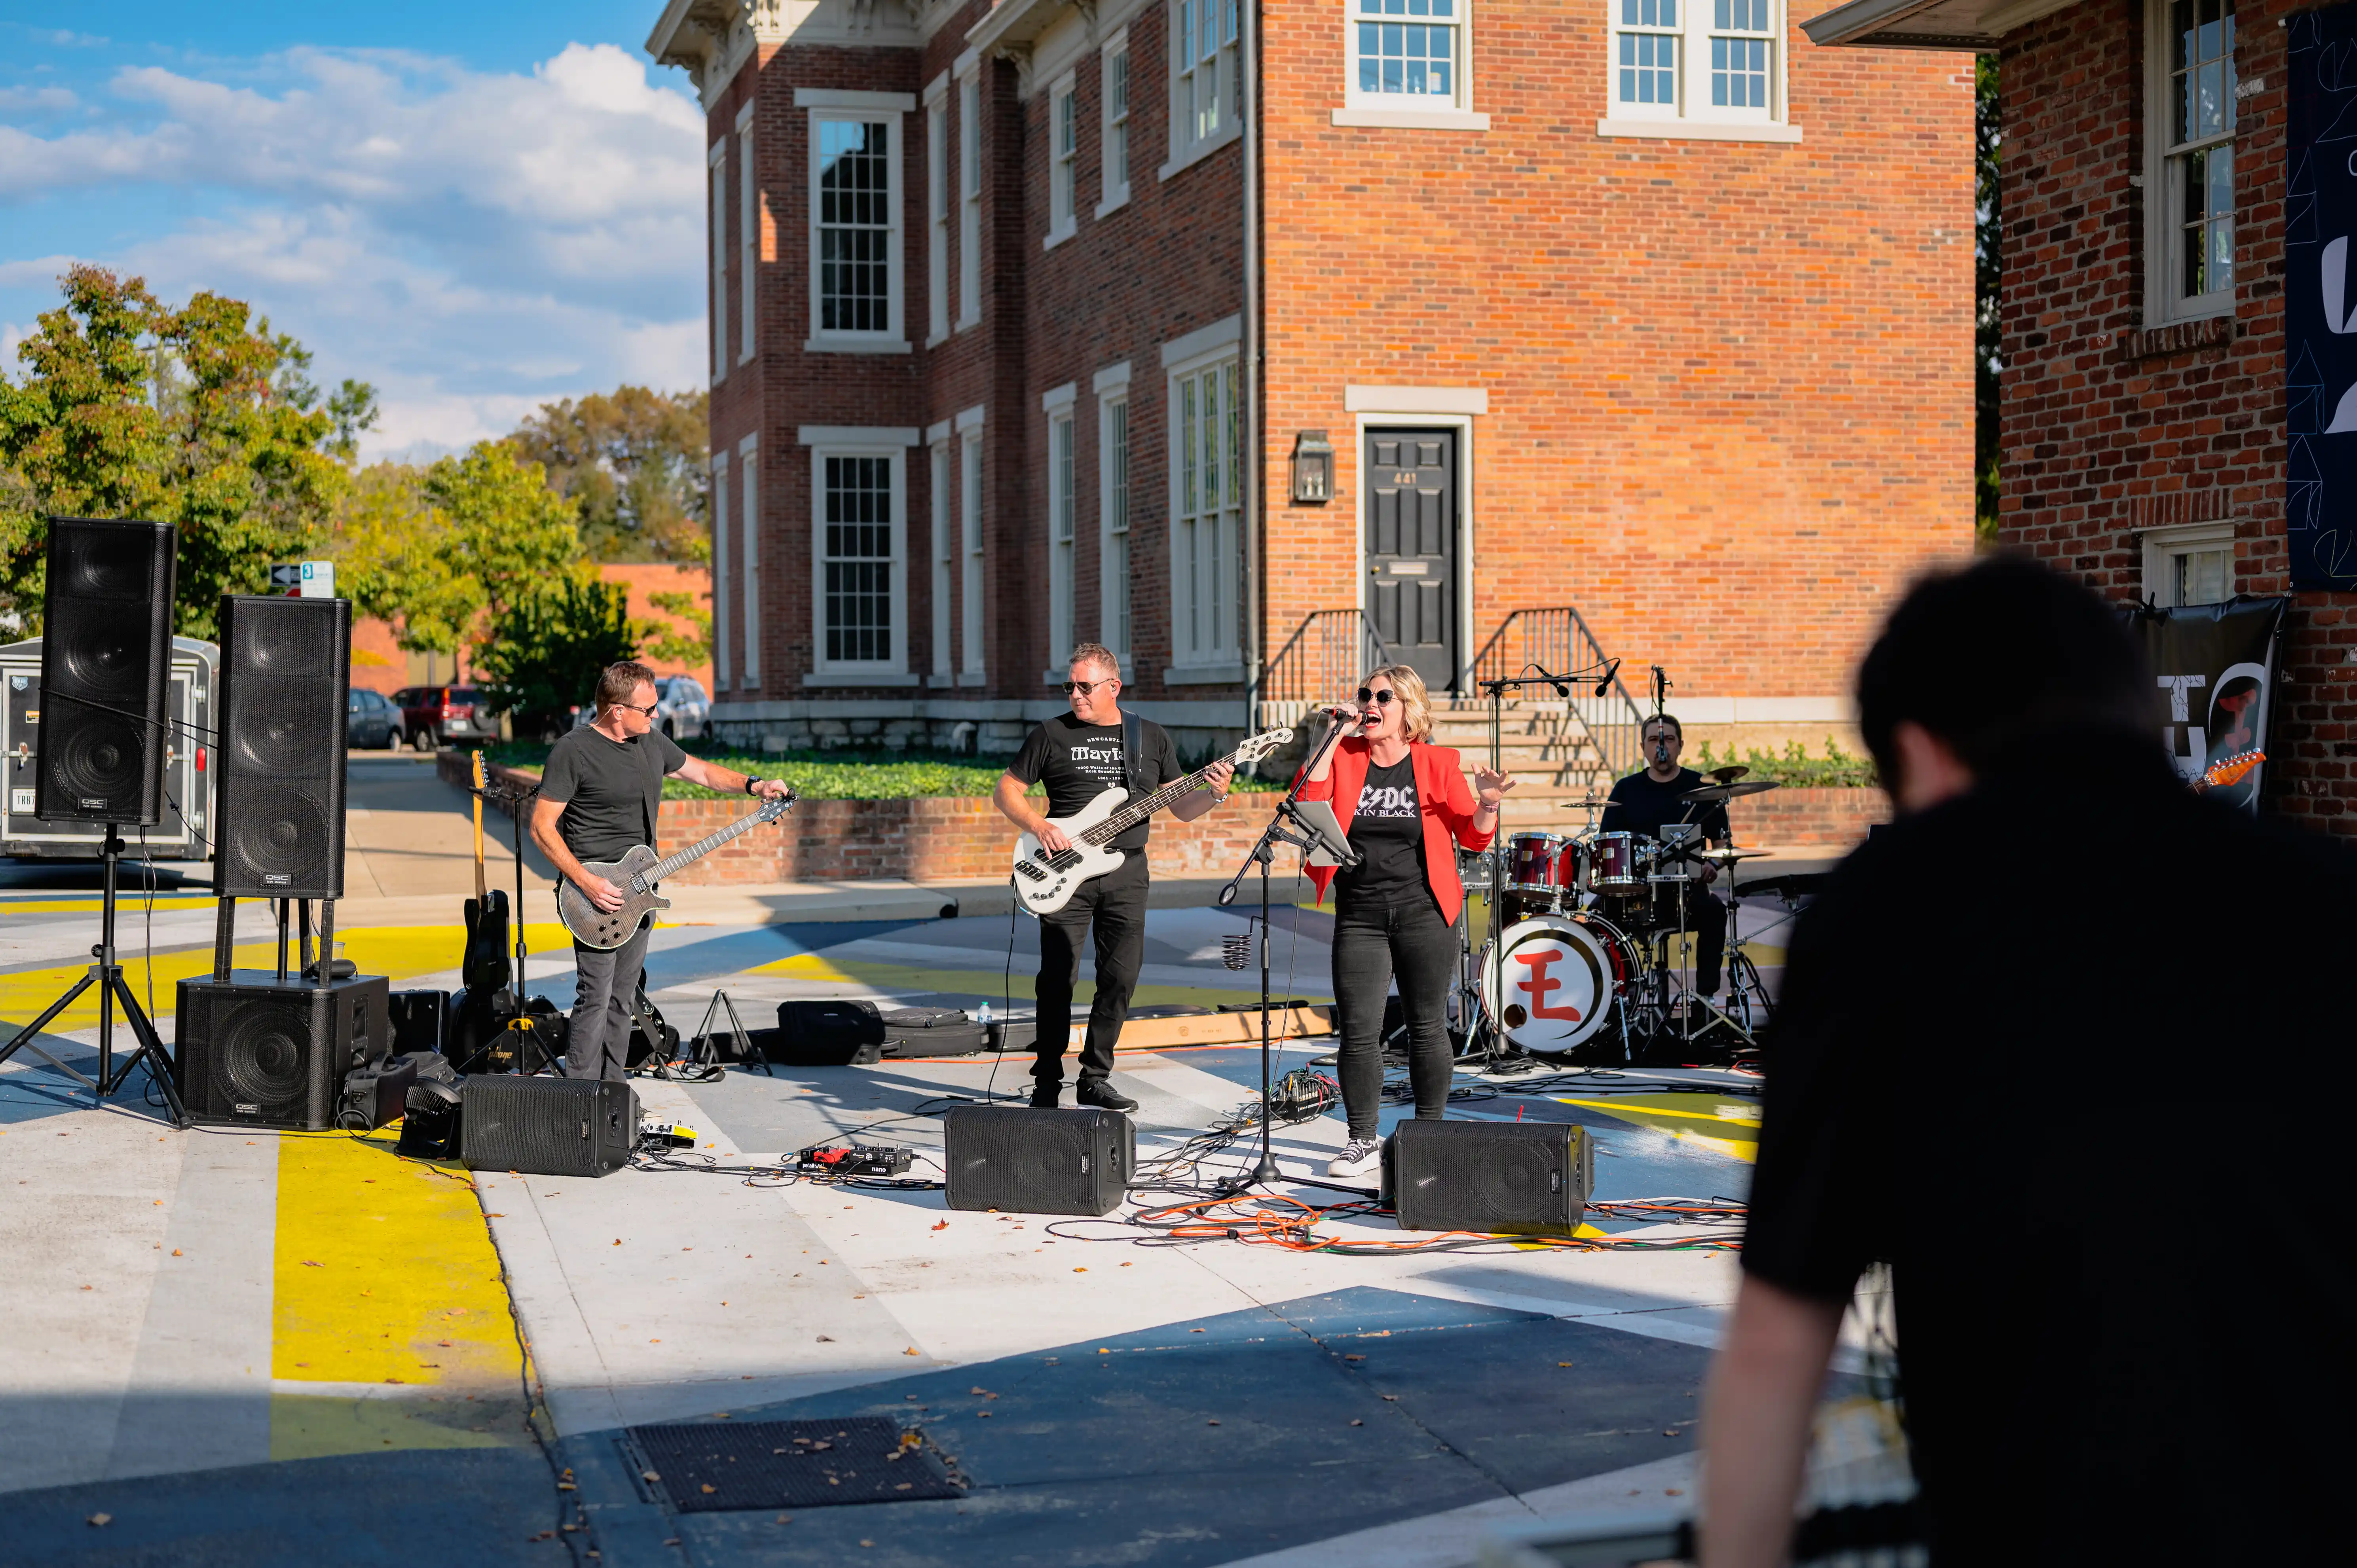 Live band performing outdoors with guitarist, bassist, and drummer in front of a brick building on a sunny day.